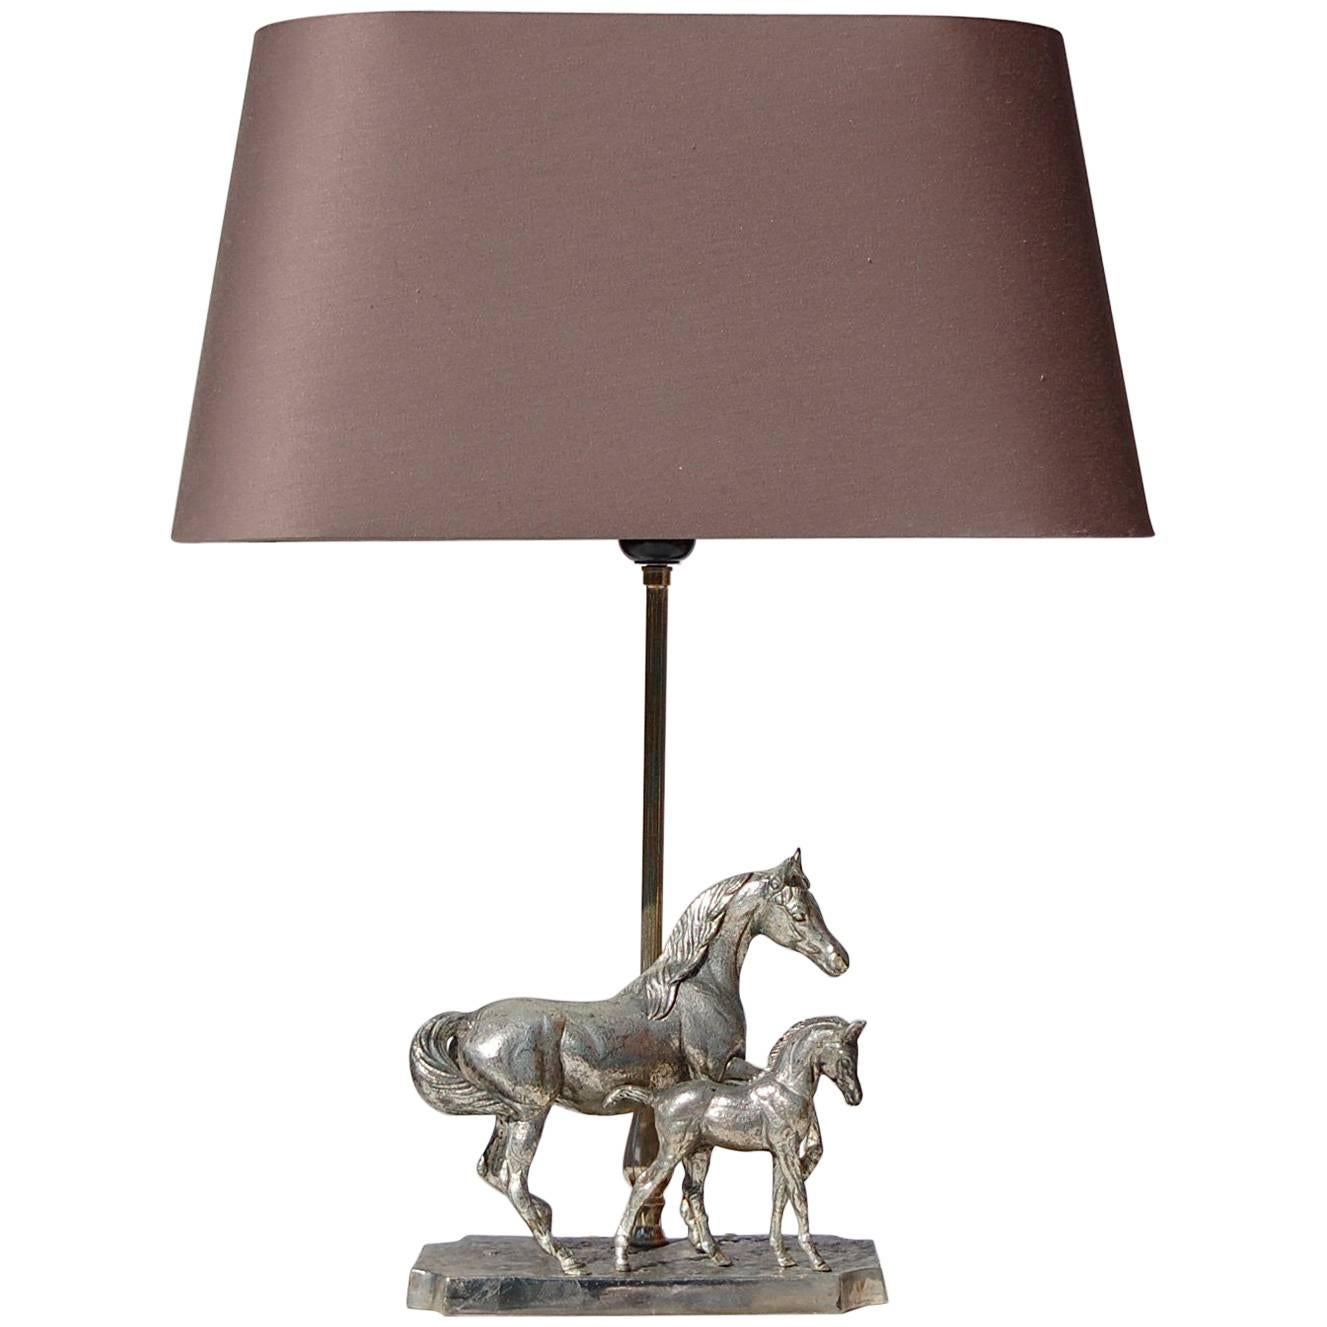 Limited Edition Silver Plated Horse with Foal Table Lamp, 1980s, France For Sale